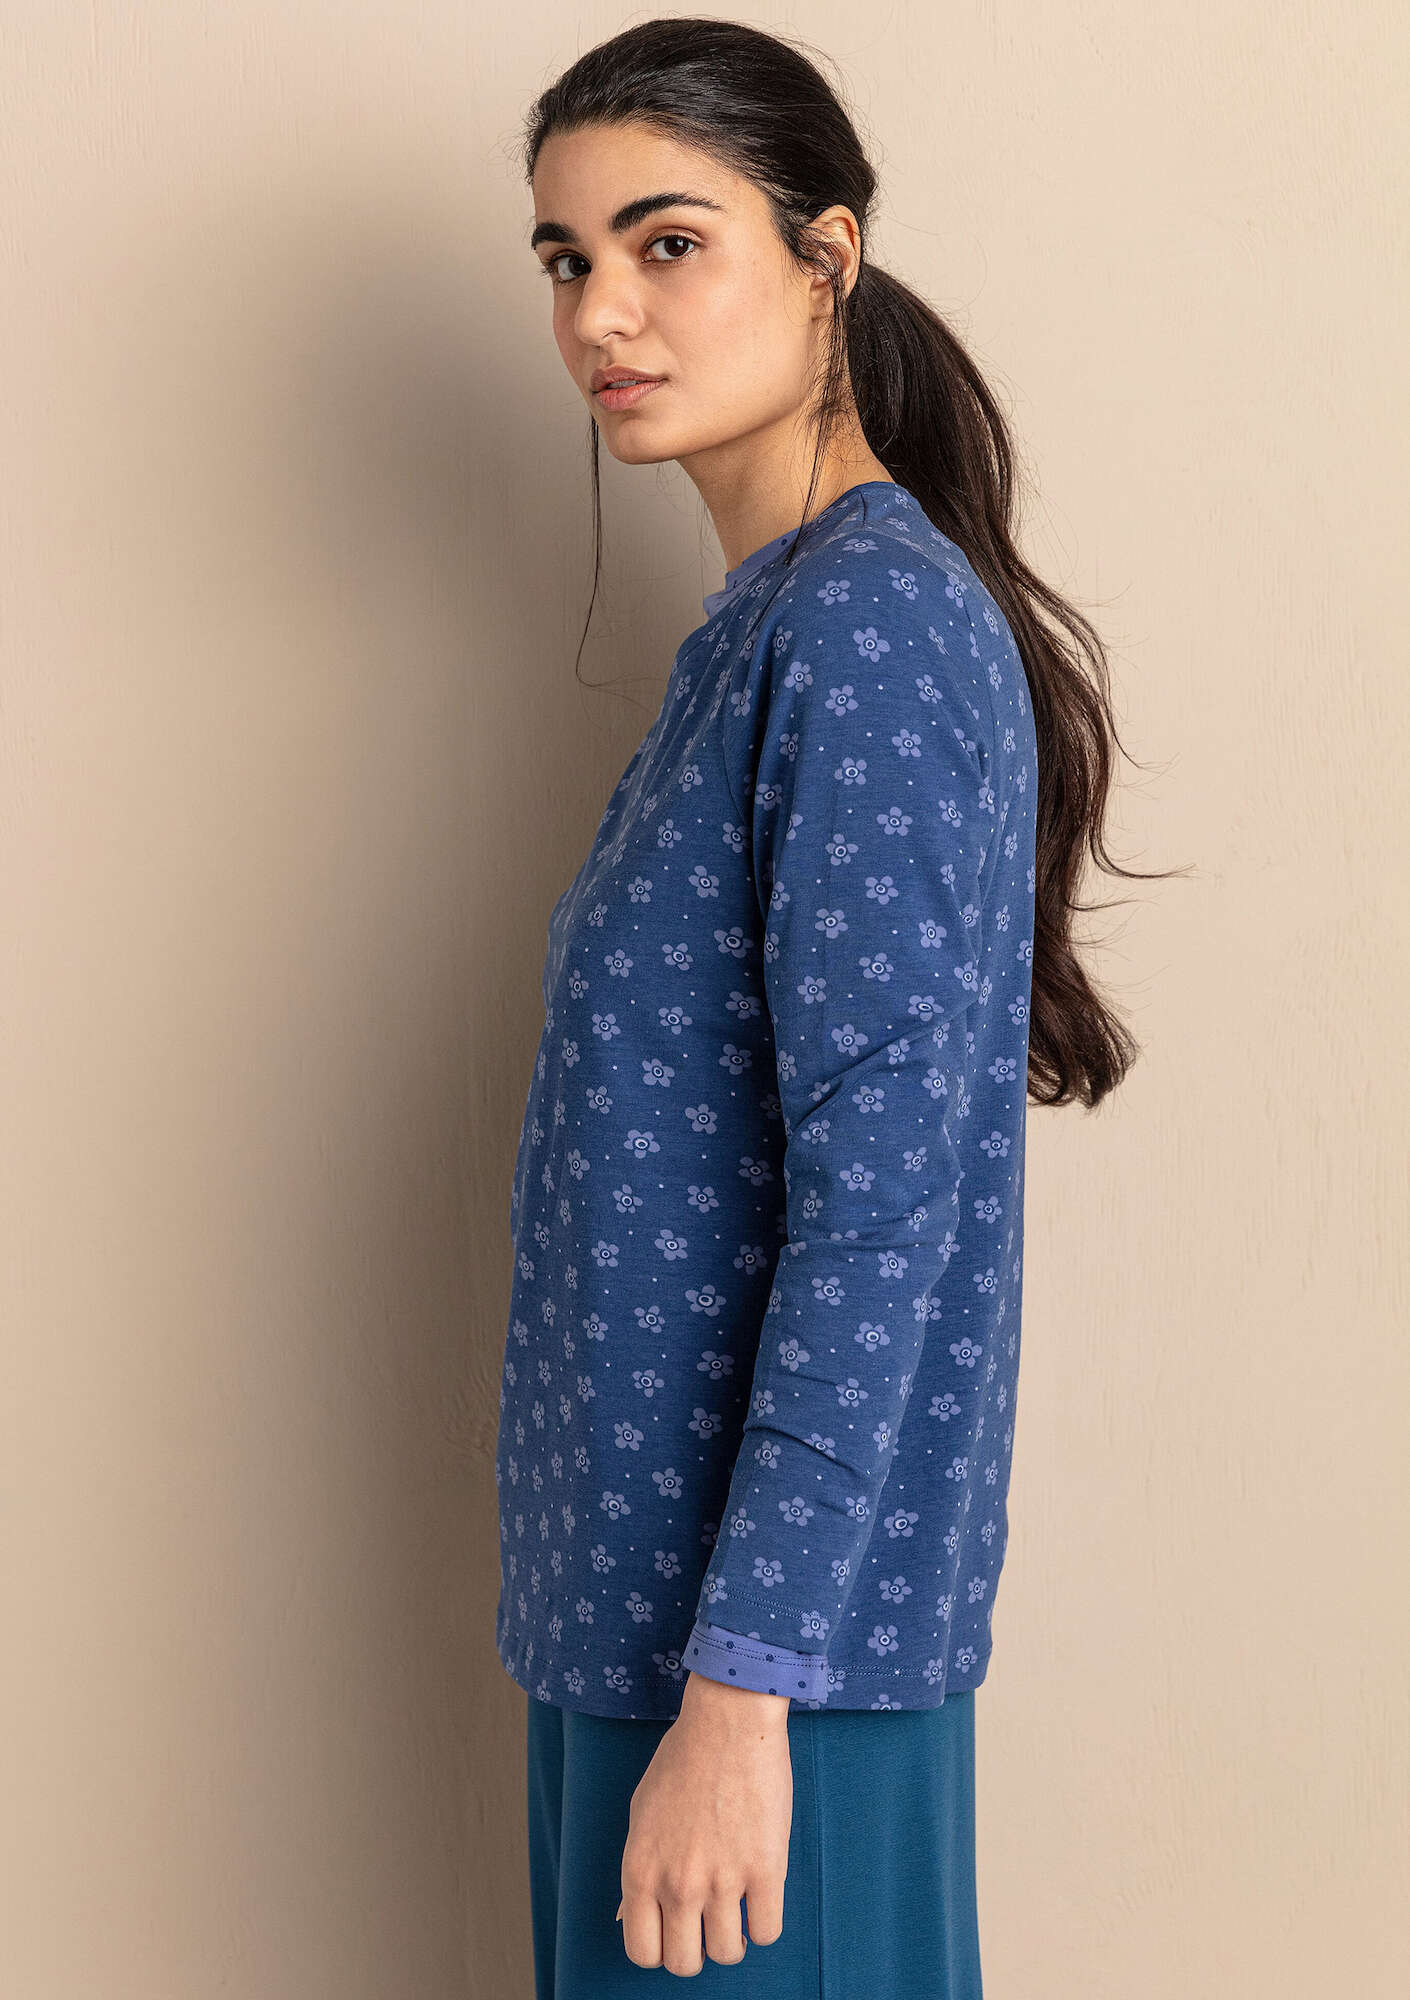 “Pytte” jersey top in organic cotton/spandex indigo blue/patterned thumbnail